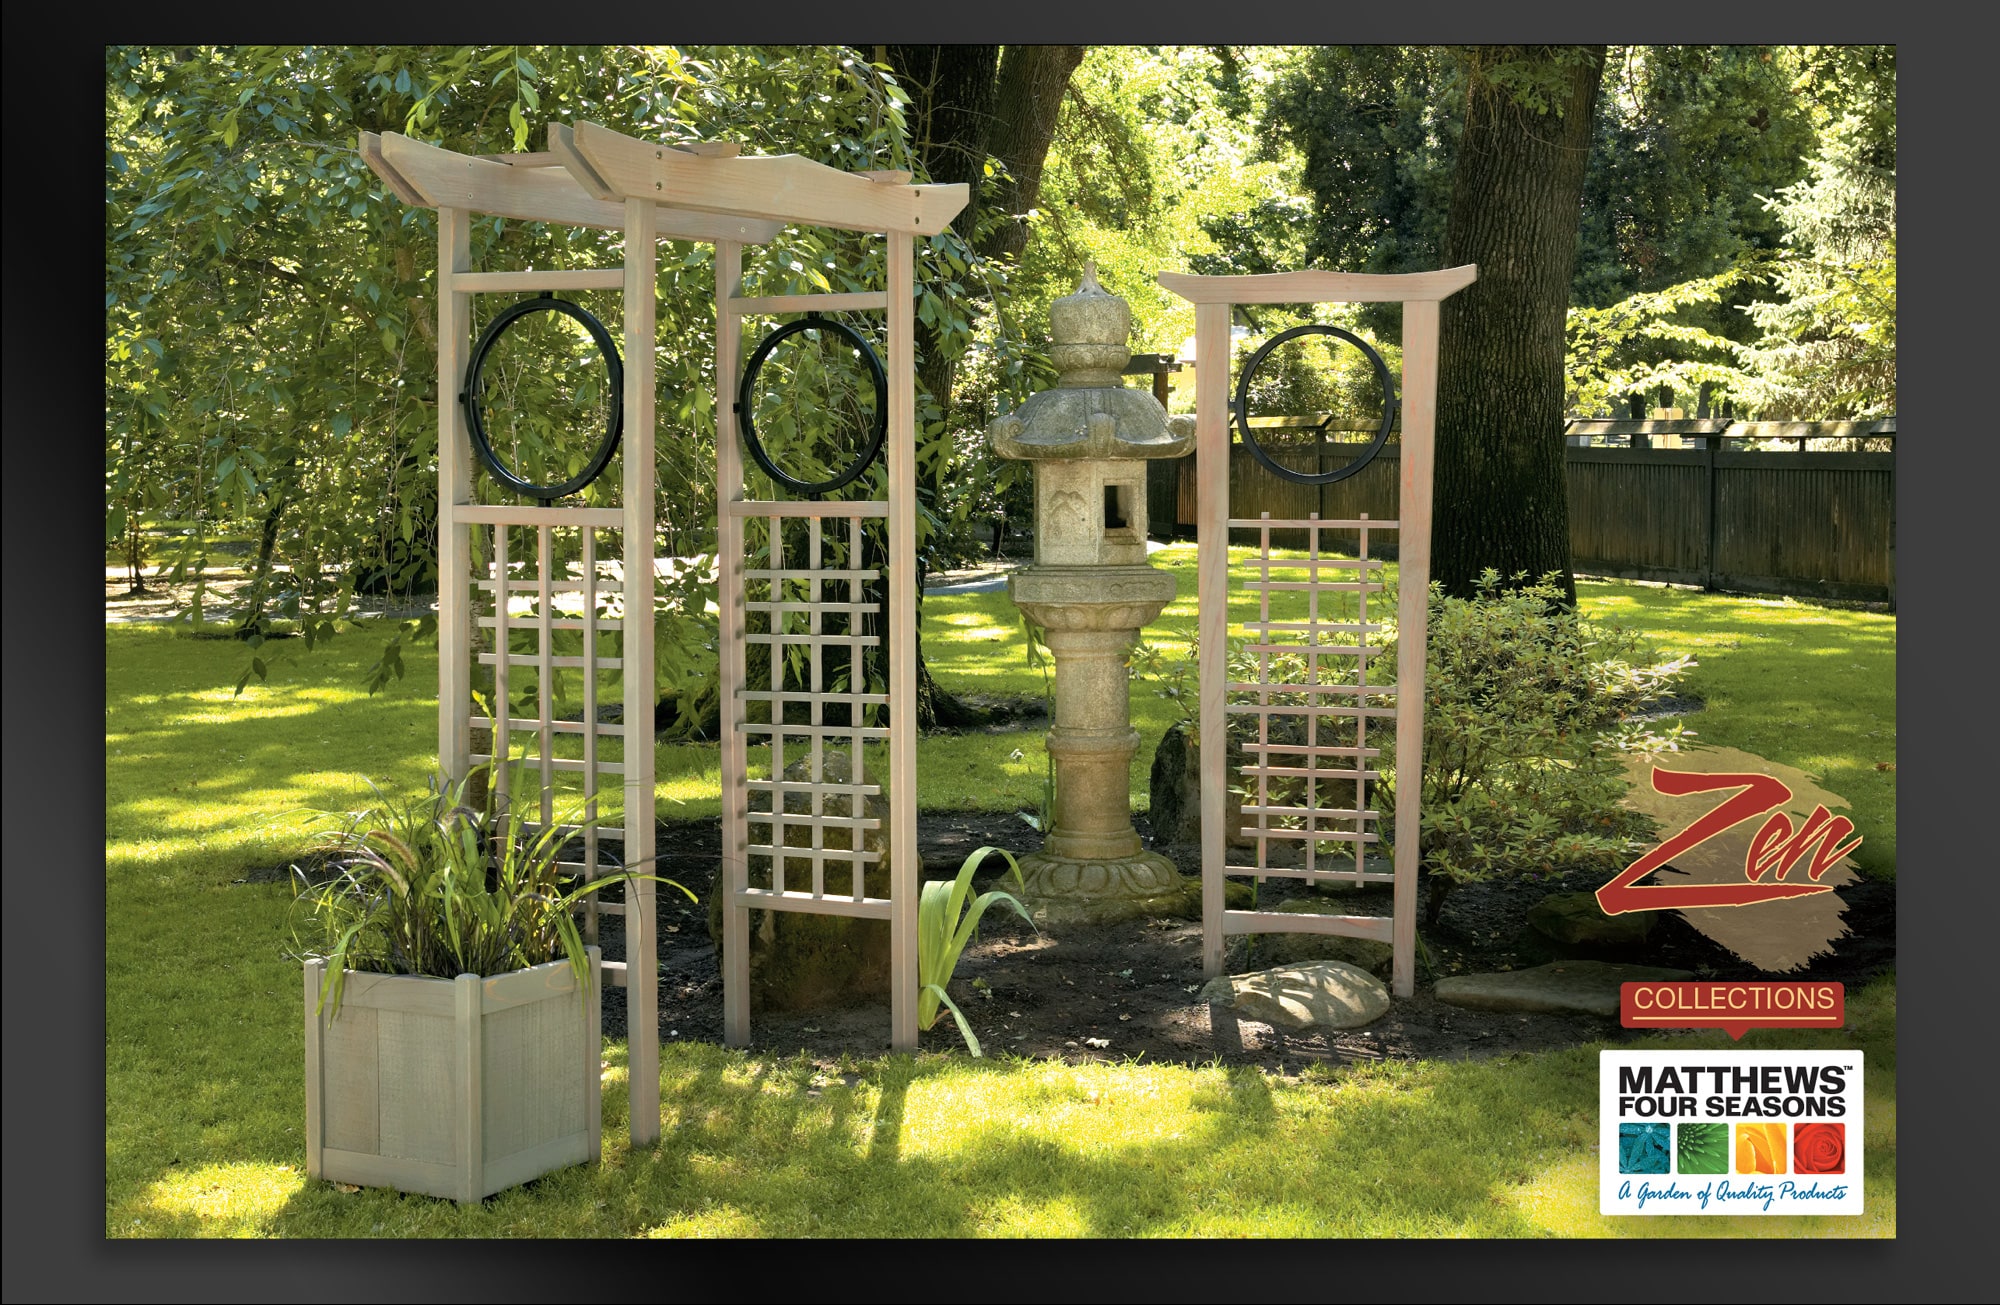  USA, Box, Arbor and Trellis In-Store Banners for The Zen Collections  